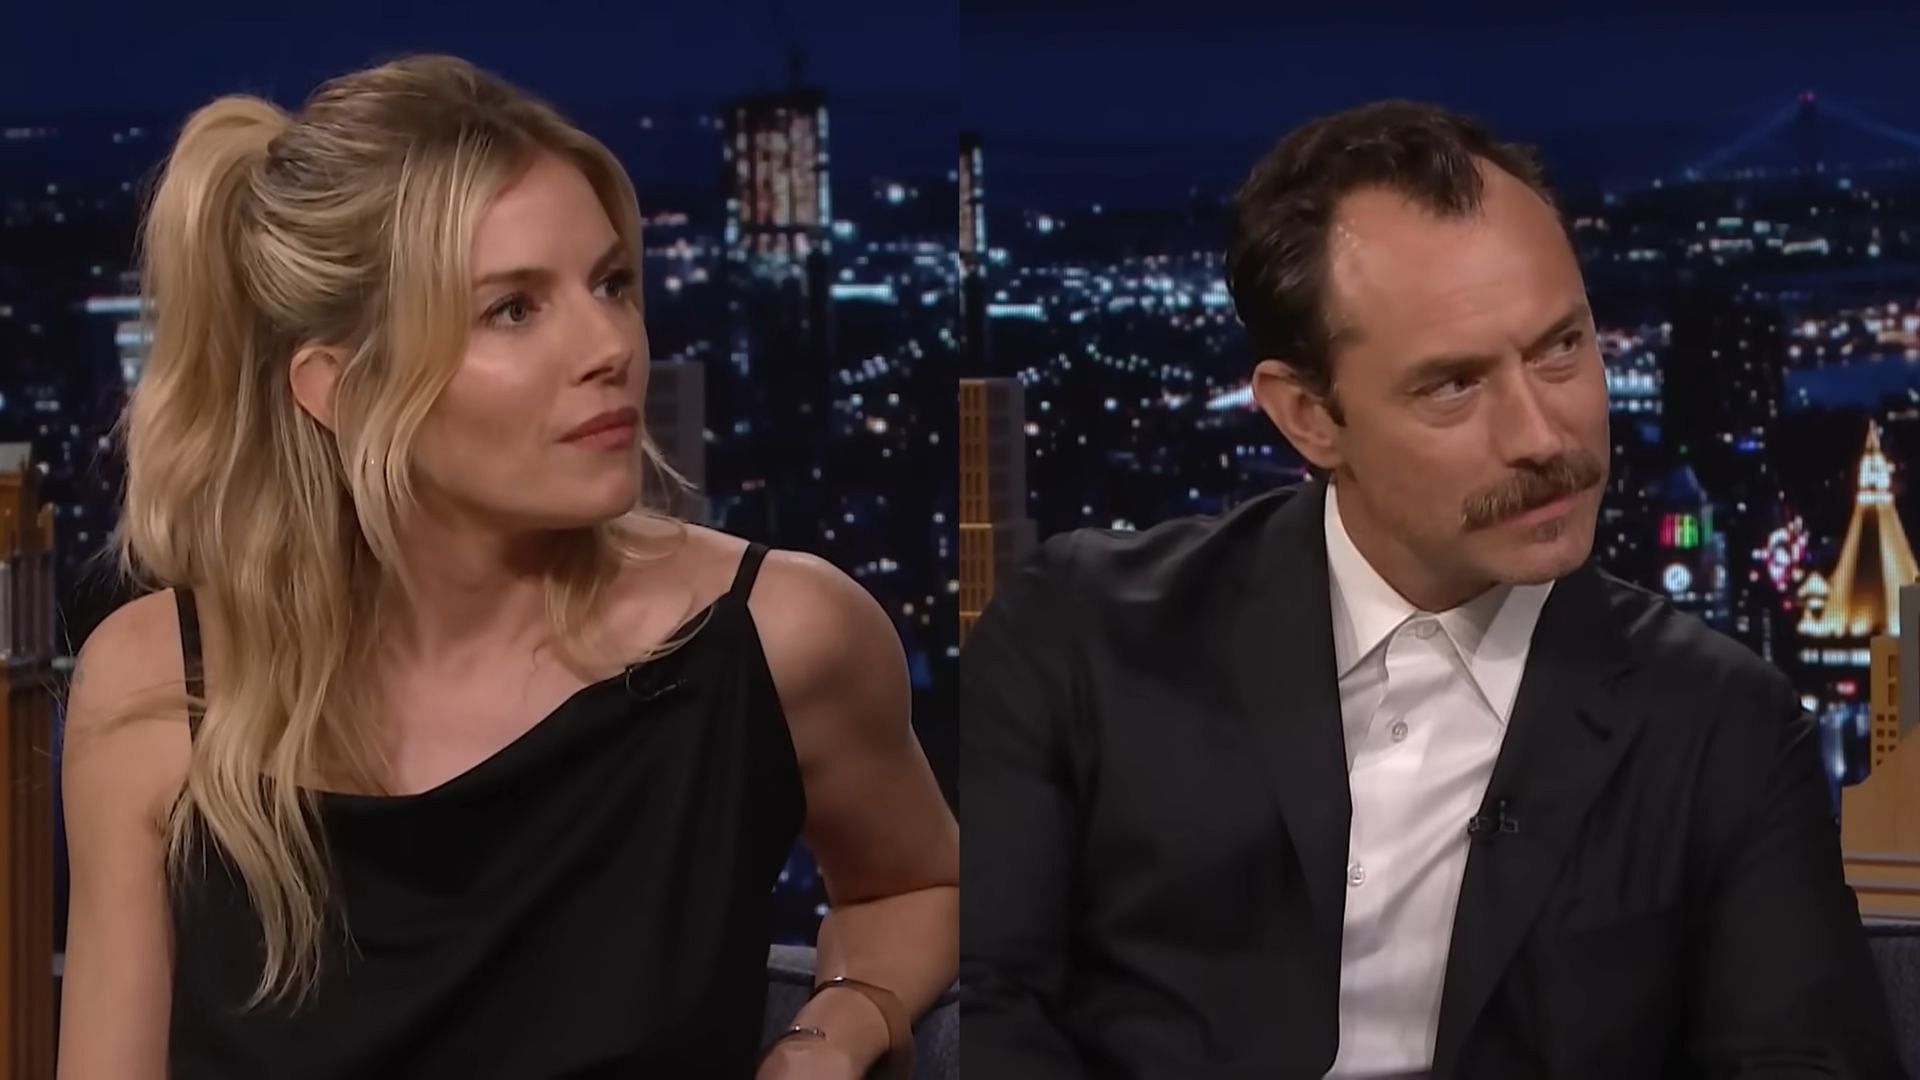 Sienna Miller opened up about the &quot;chaos&quot; surrounding her and Jude Law